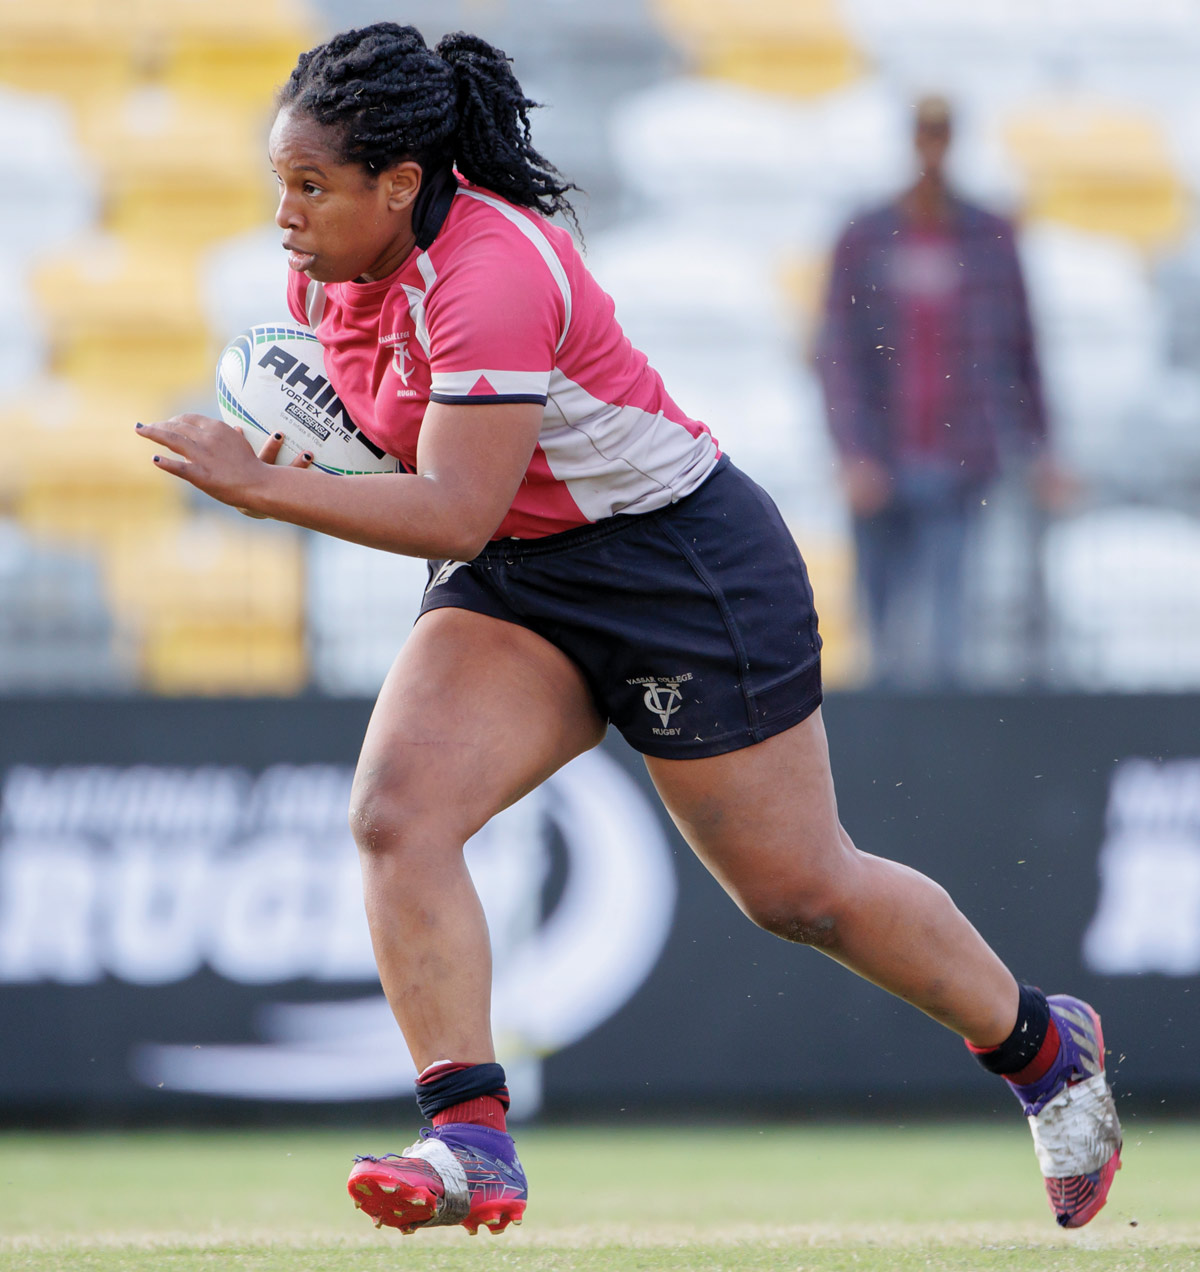 A women’s rugby player sprints across the field with a ball.